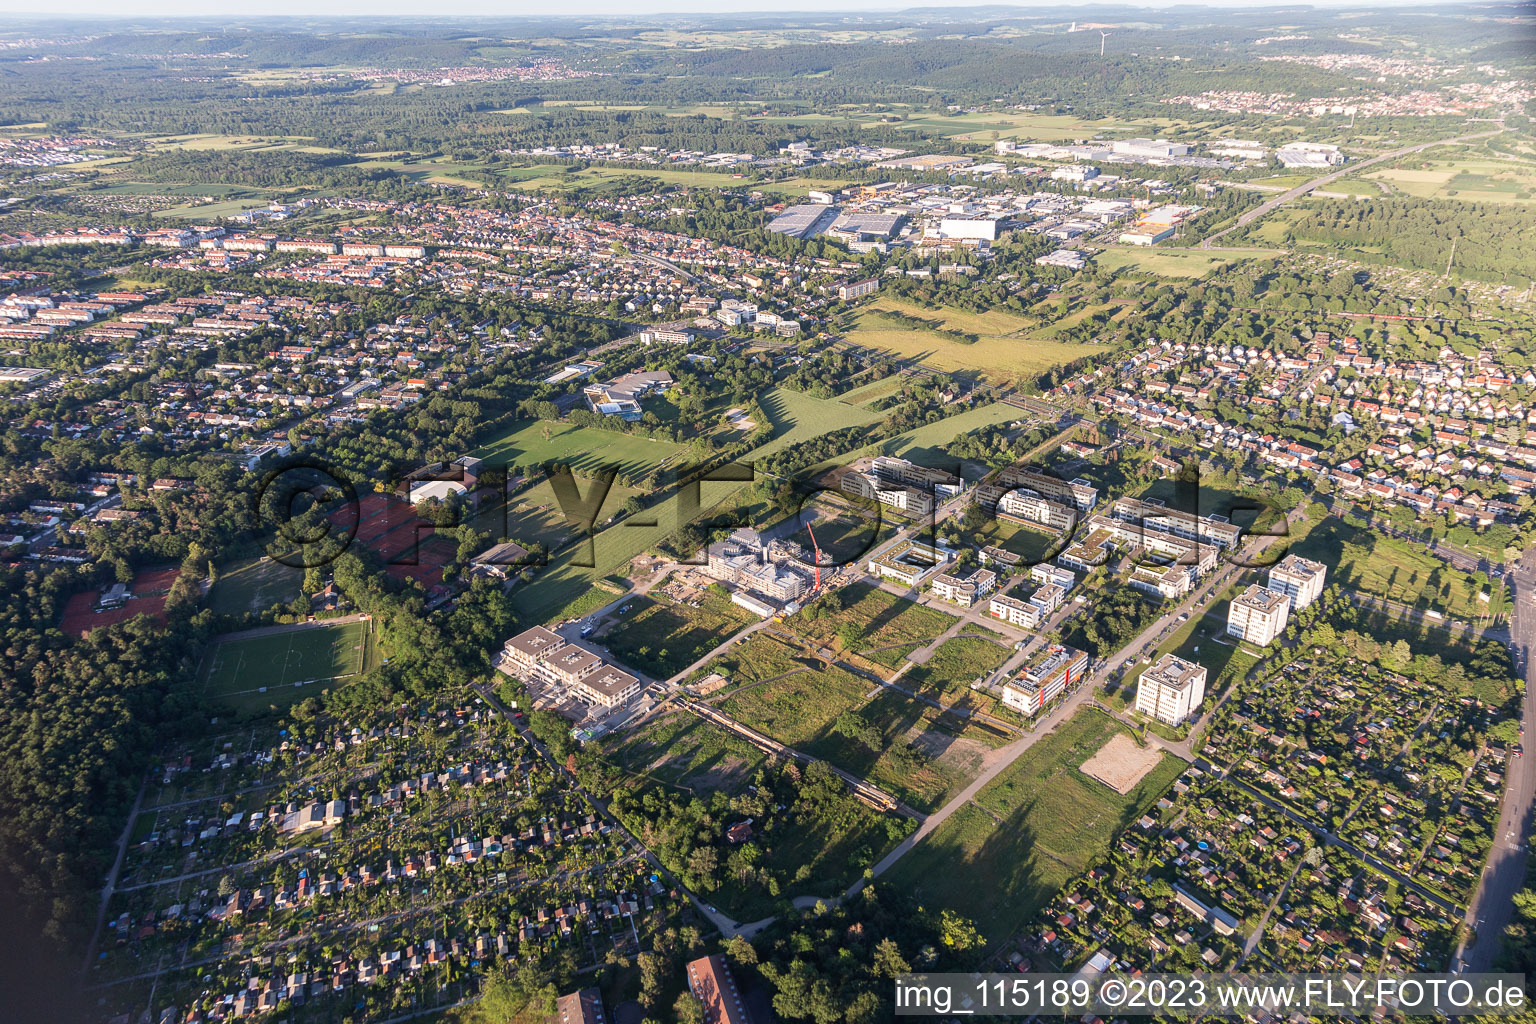 Technology Park in the district Rintheim in Karlsruhe in the state Baden-Wuerttemberg, Germany from above